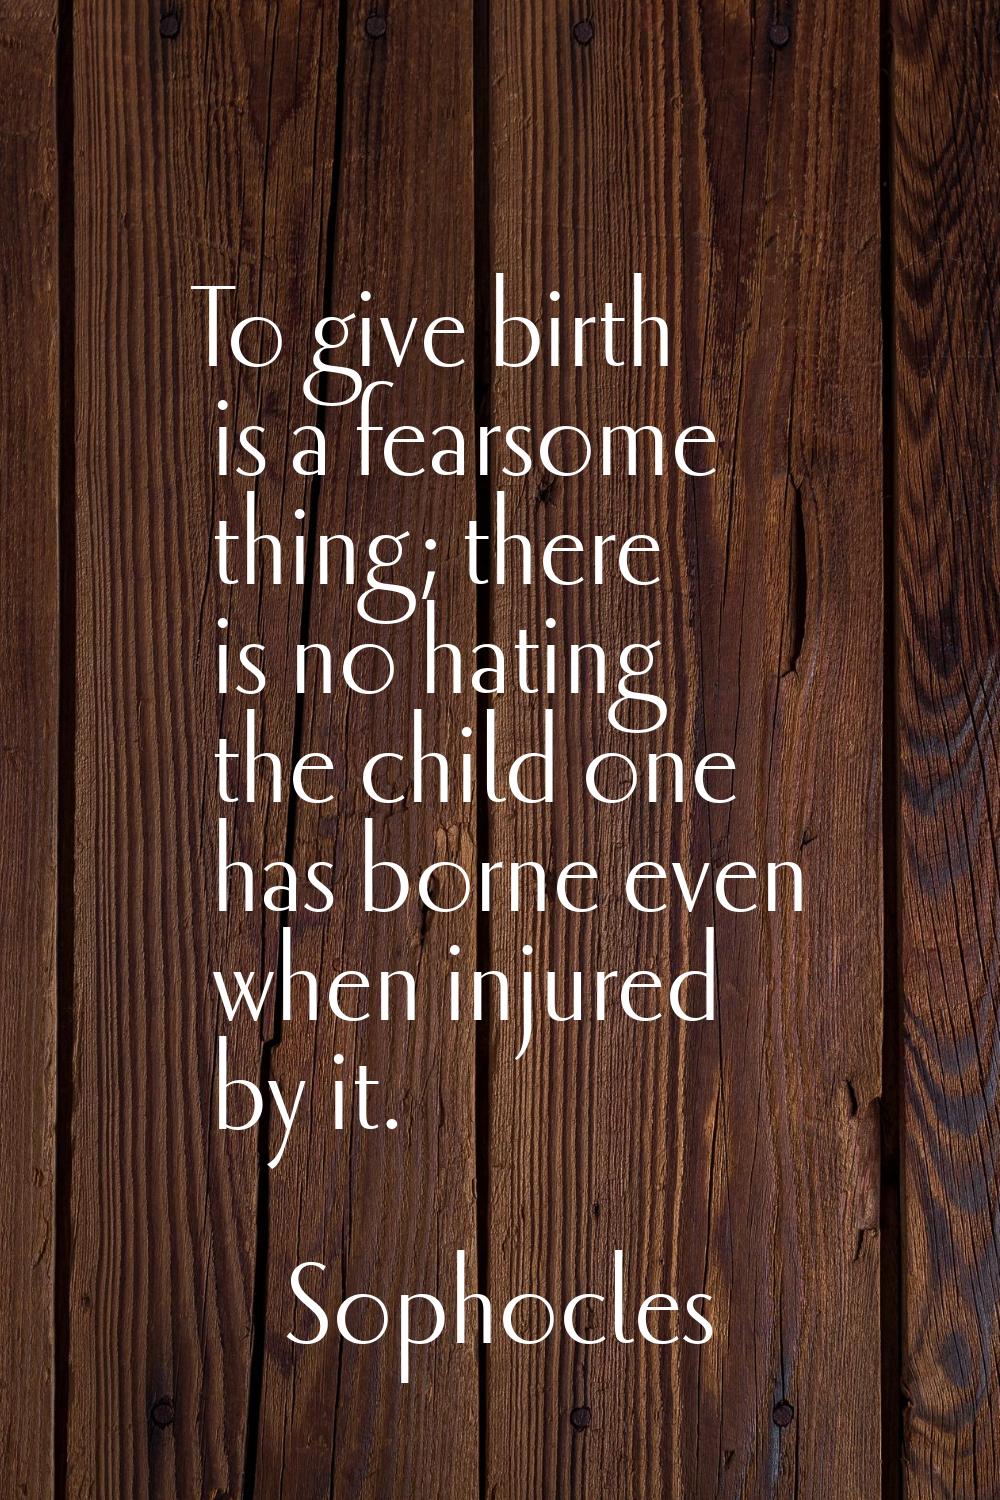 To give birth is a fearsome thing; there is no hating the child one has borne even when injured by 